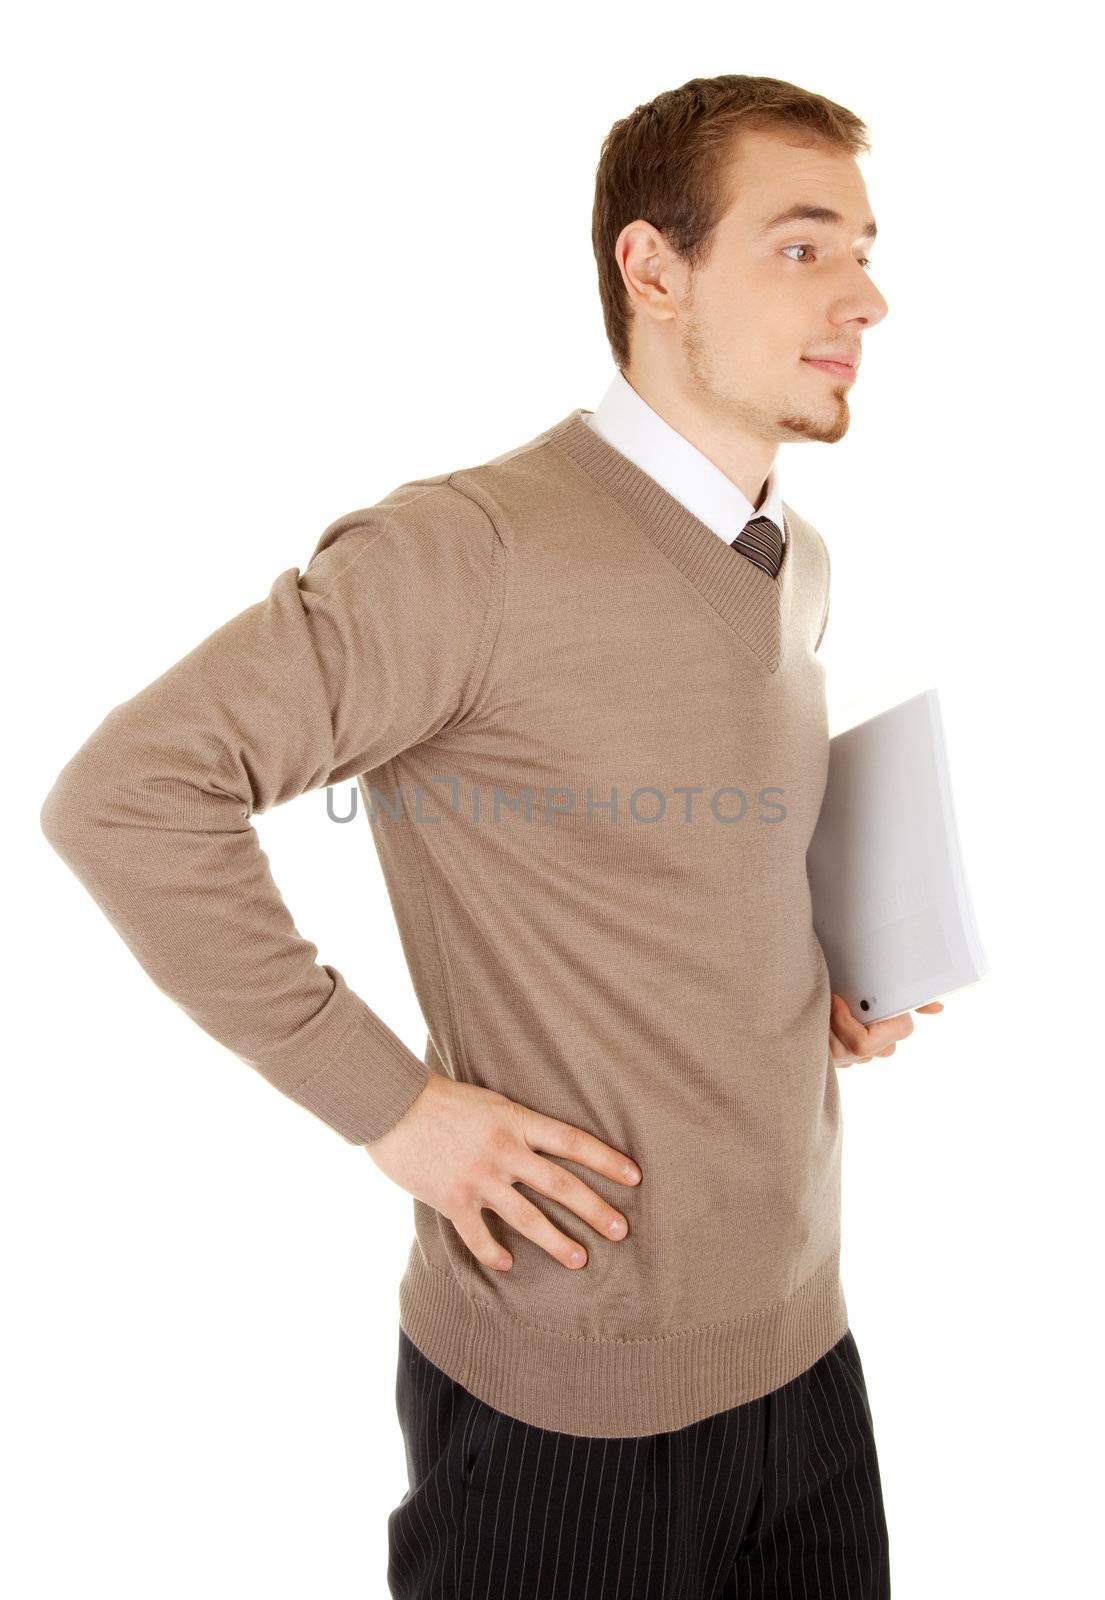 Calm young businessmen man with documents, front view. Isolated on white background.